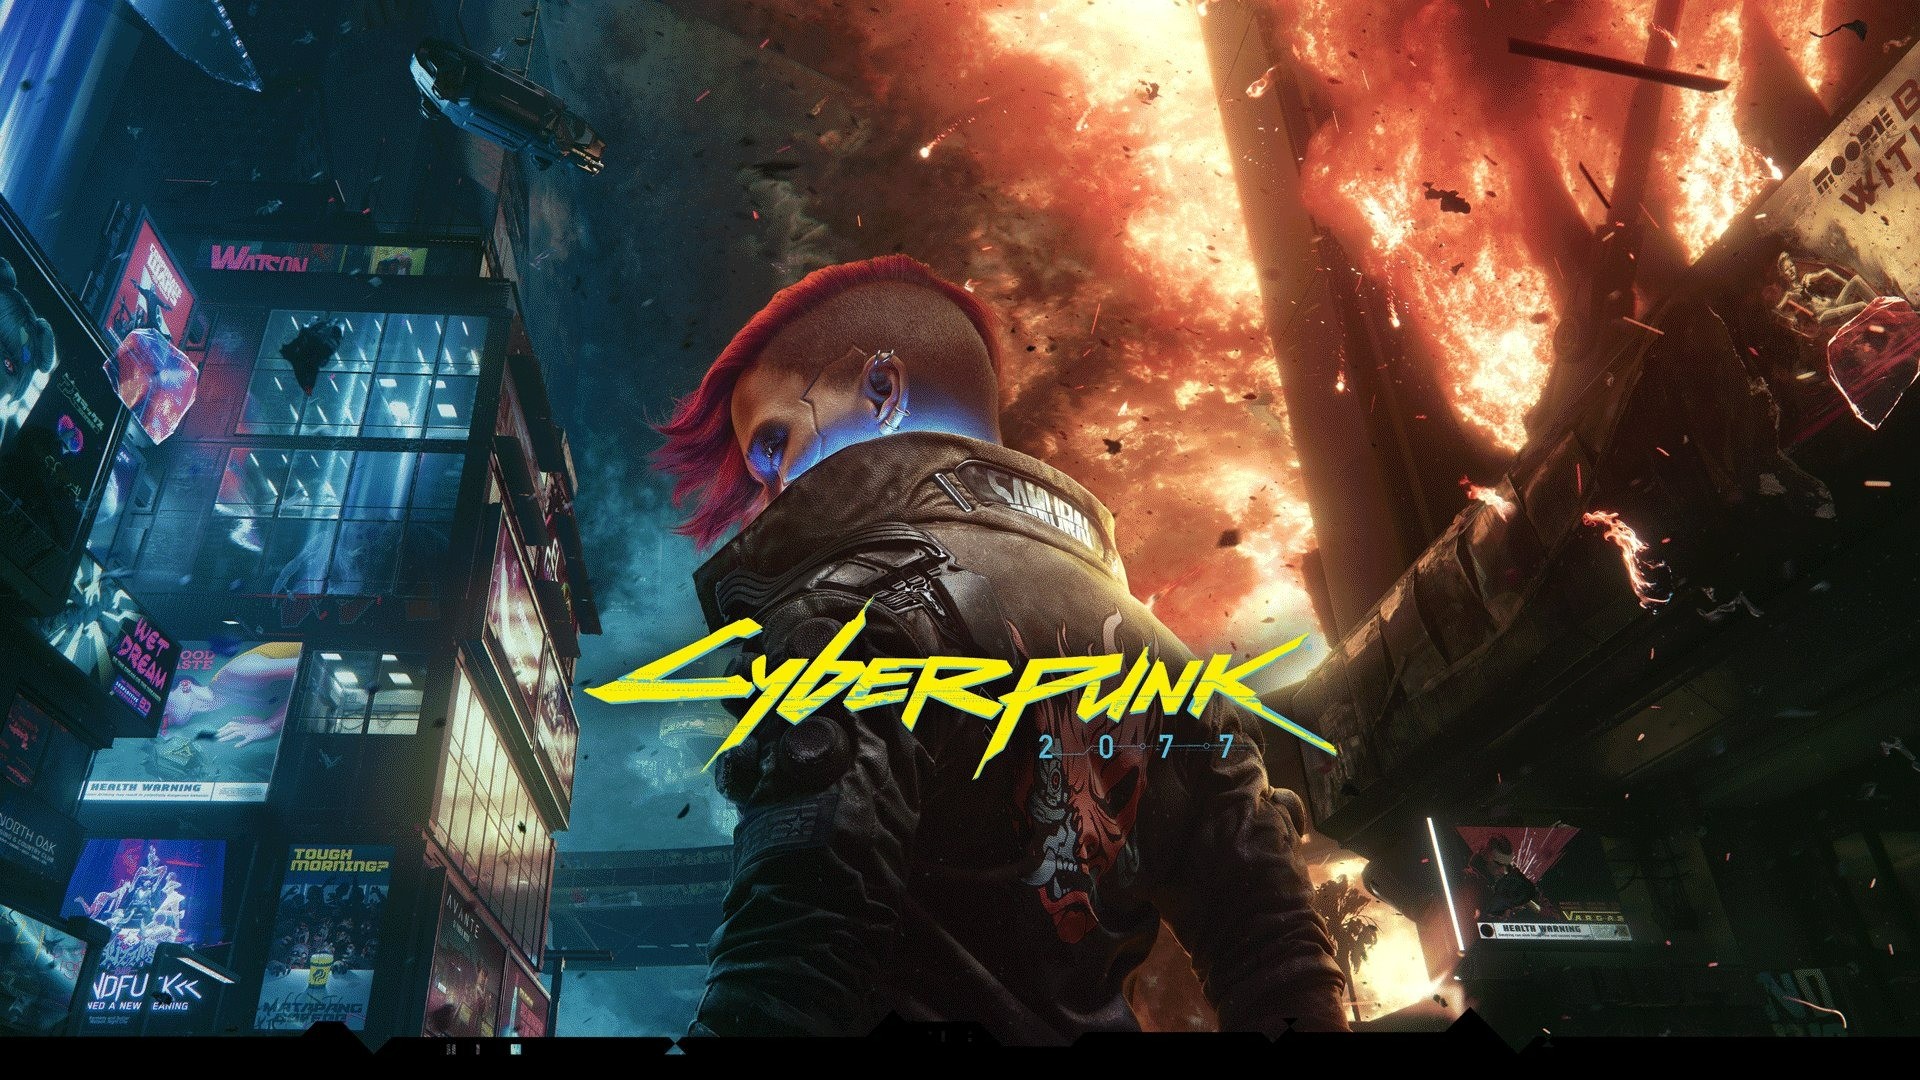 Cyberpunk 2077 will receive “Game of the Year” version in 2023
